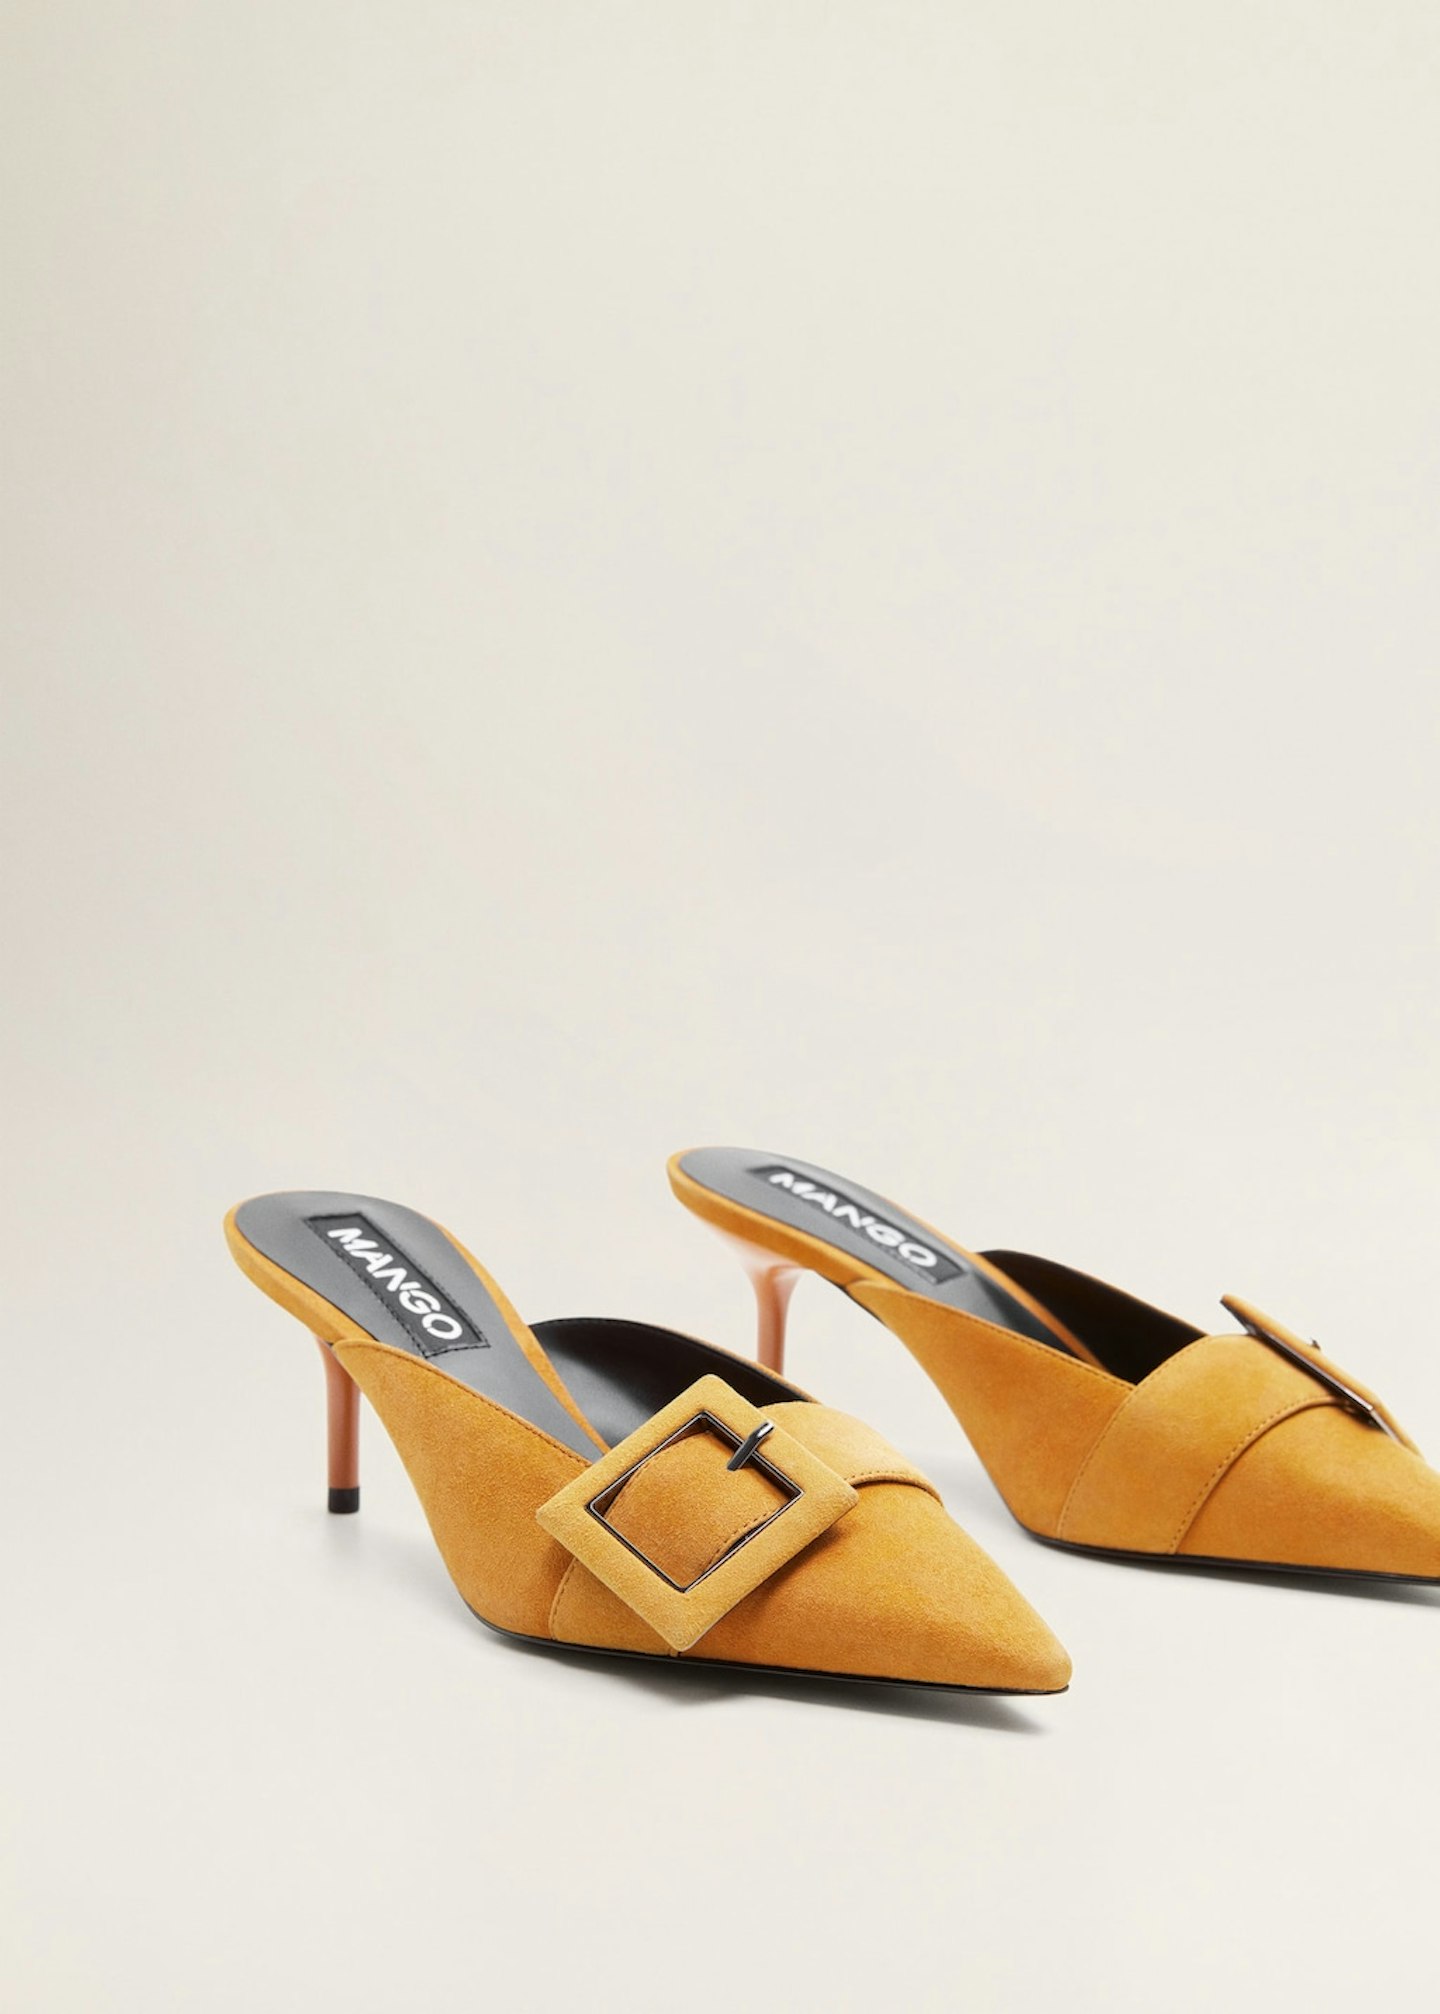 Mango, Buckle Leather Shoes, £59.99